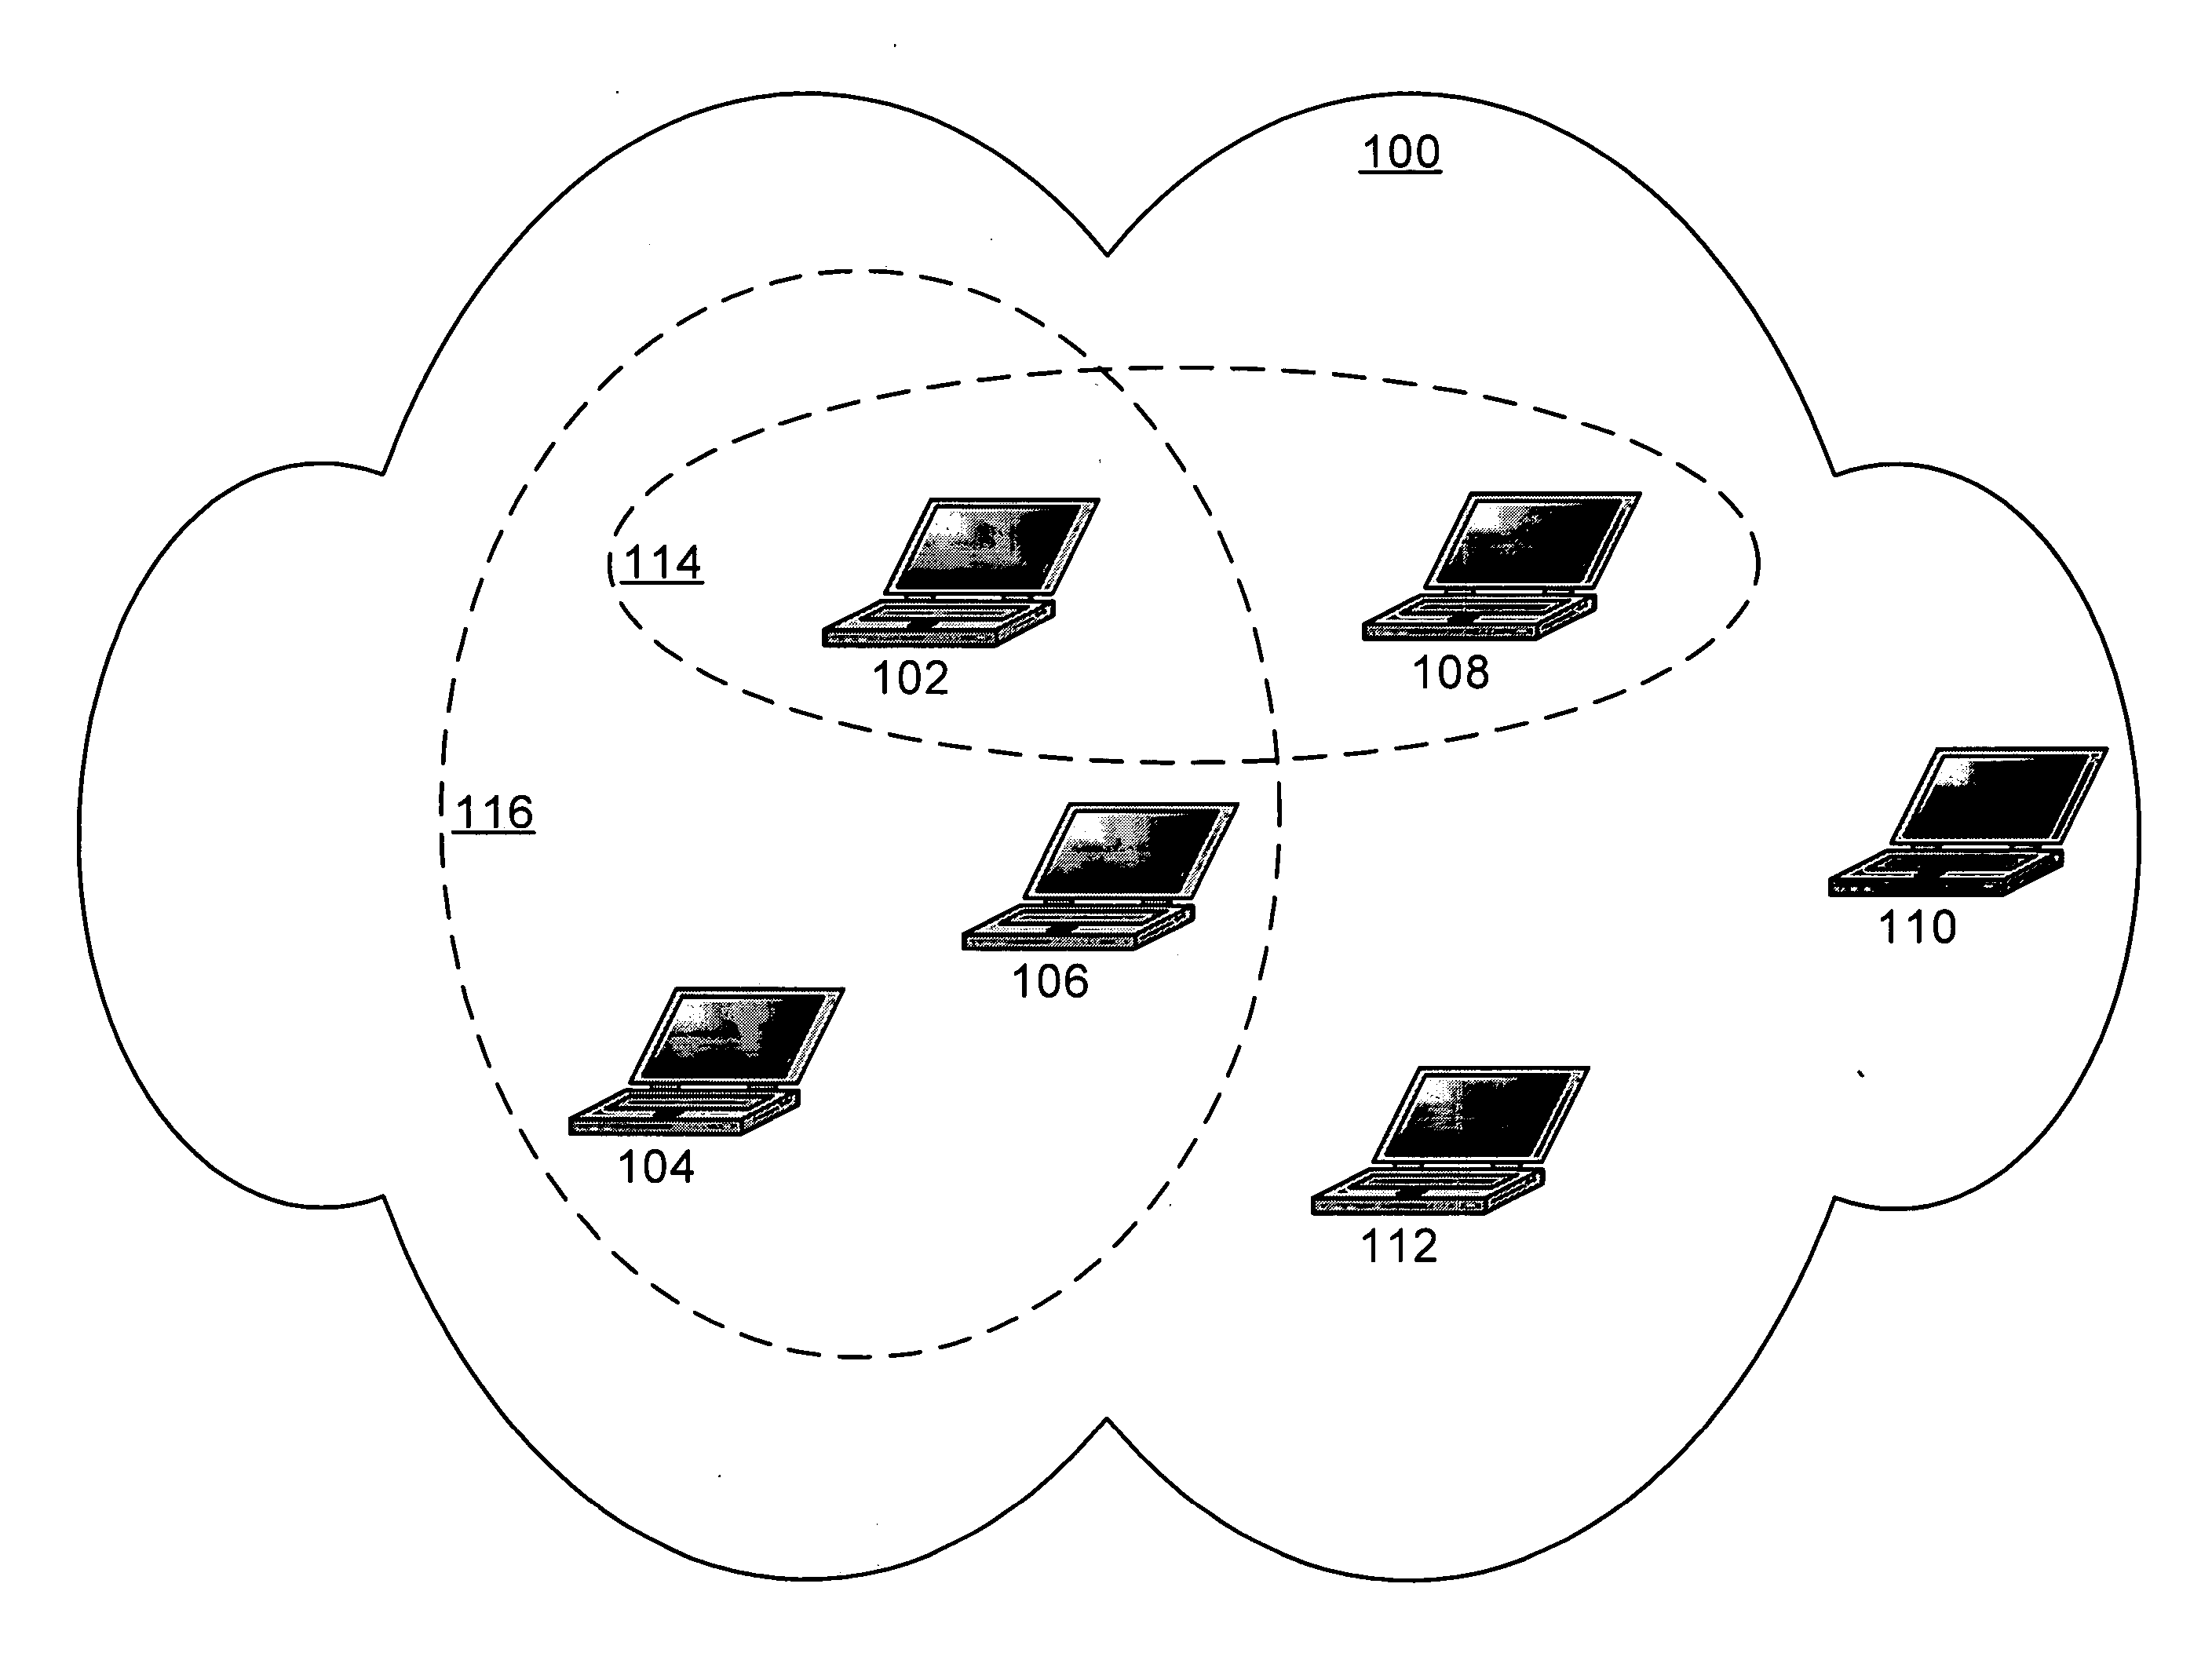 Method and system for managing identities in a peer-to-peer networking environment